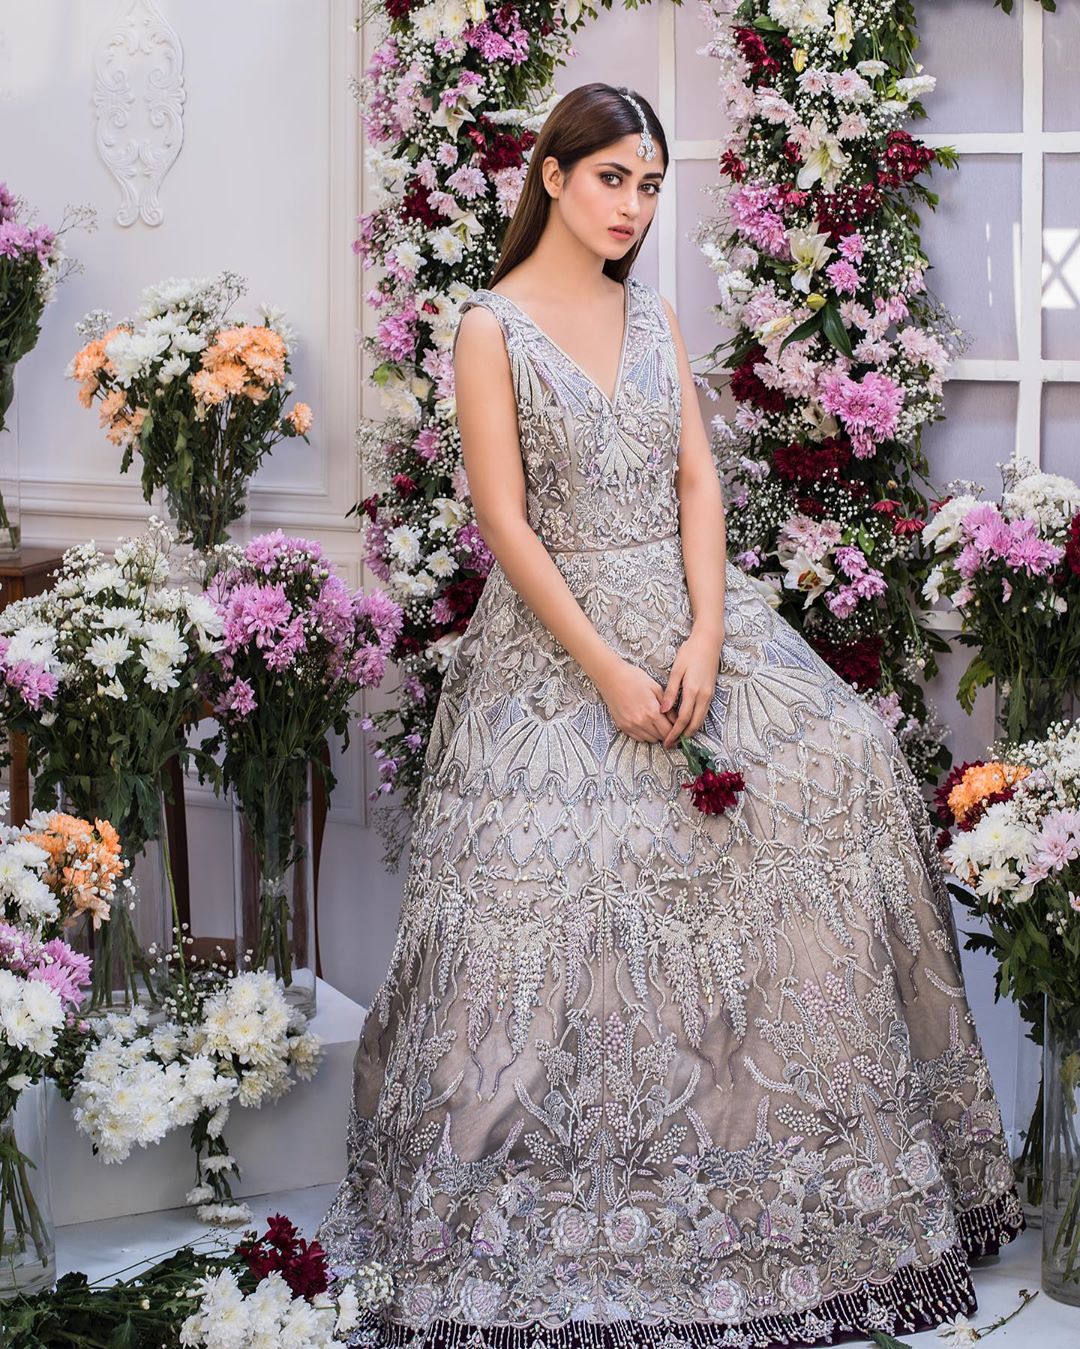 Beautiful Sajal Ali's Clicks From Her Bridal Photo Shoots